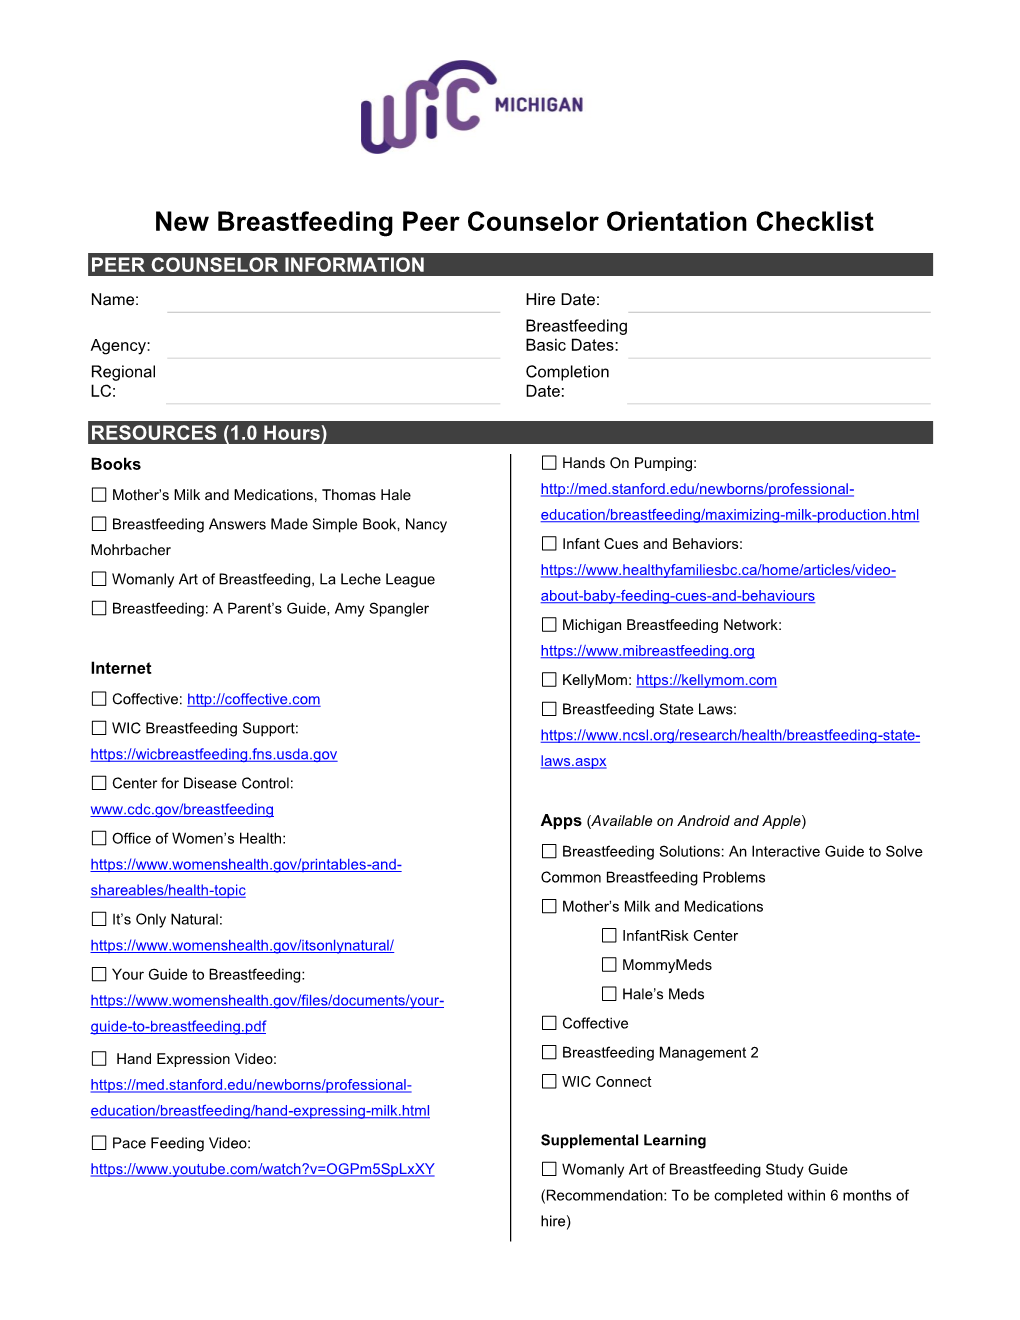 New Breastfeeding Peer Counselor Orientation Checklist PEER COUNSELOR INFORMATION Name: Hire Date: Breastfeeding Agency: Basic Dates: Regional Completion LC: Date